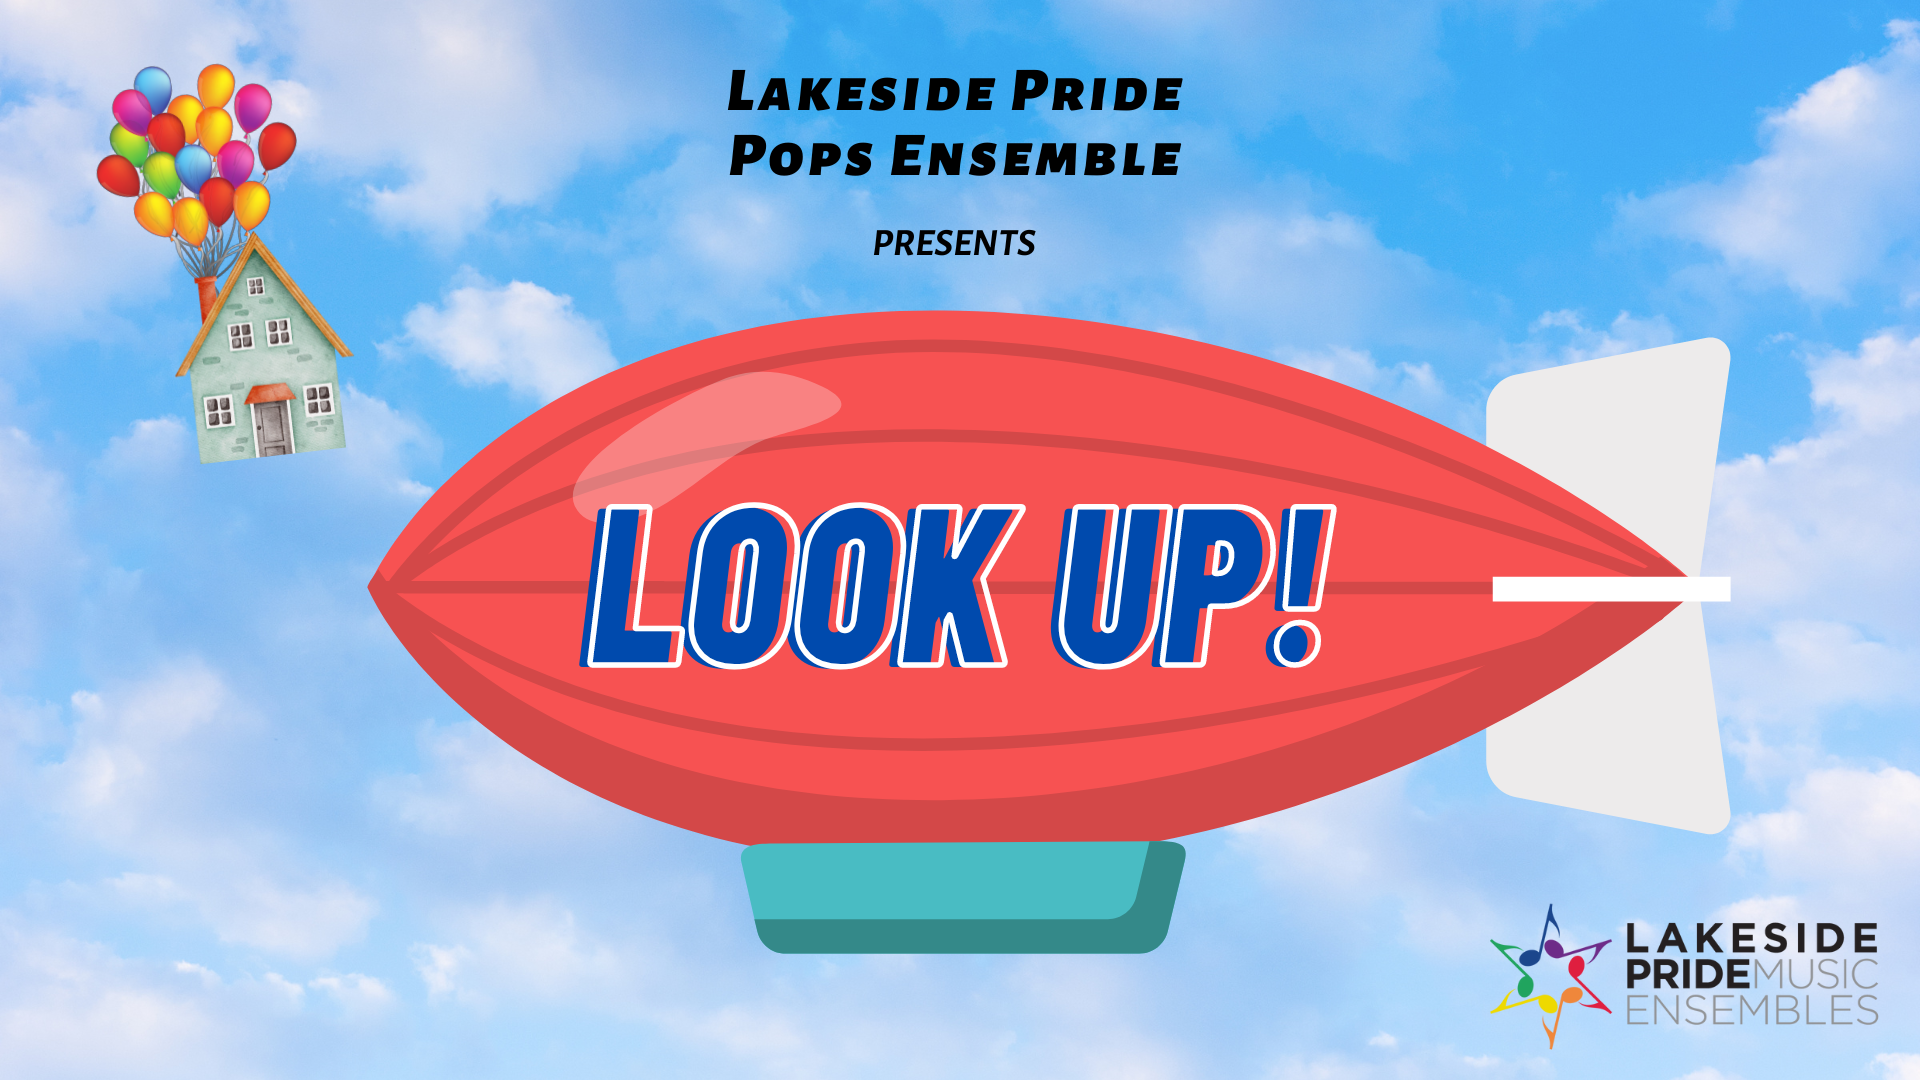 Lakeside Pride Pops Ensemble: Look Up! Cover Photo. Air Blimp and floating house attached to a bunch of balloons, both floating in the sky